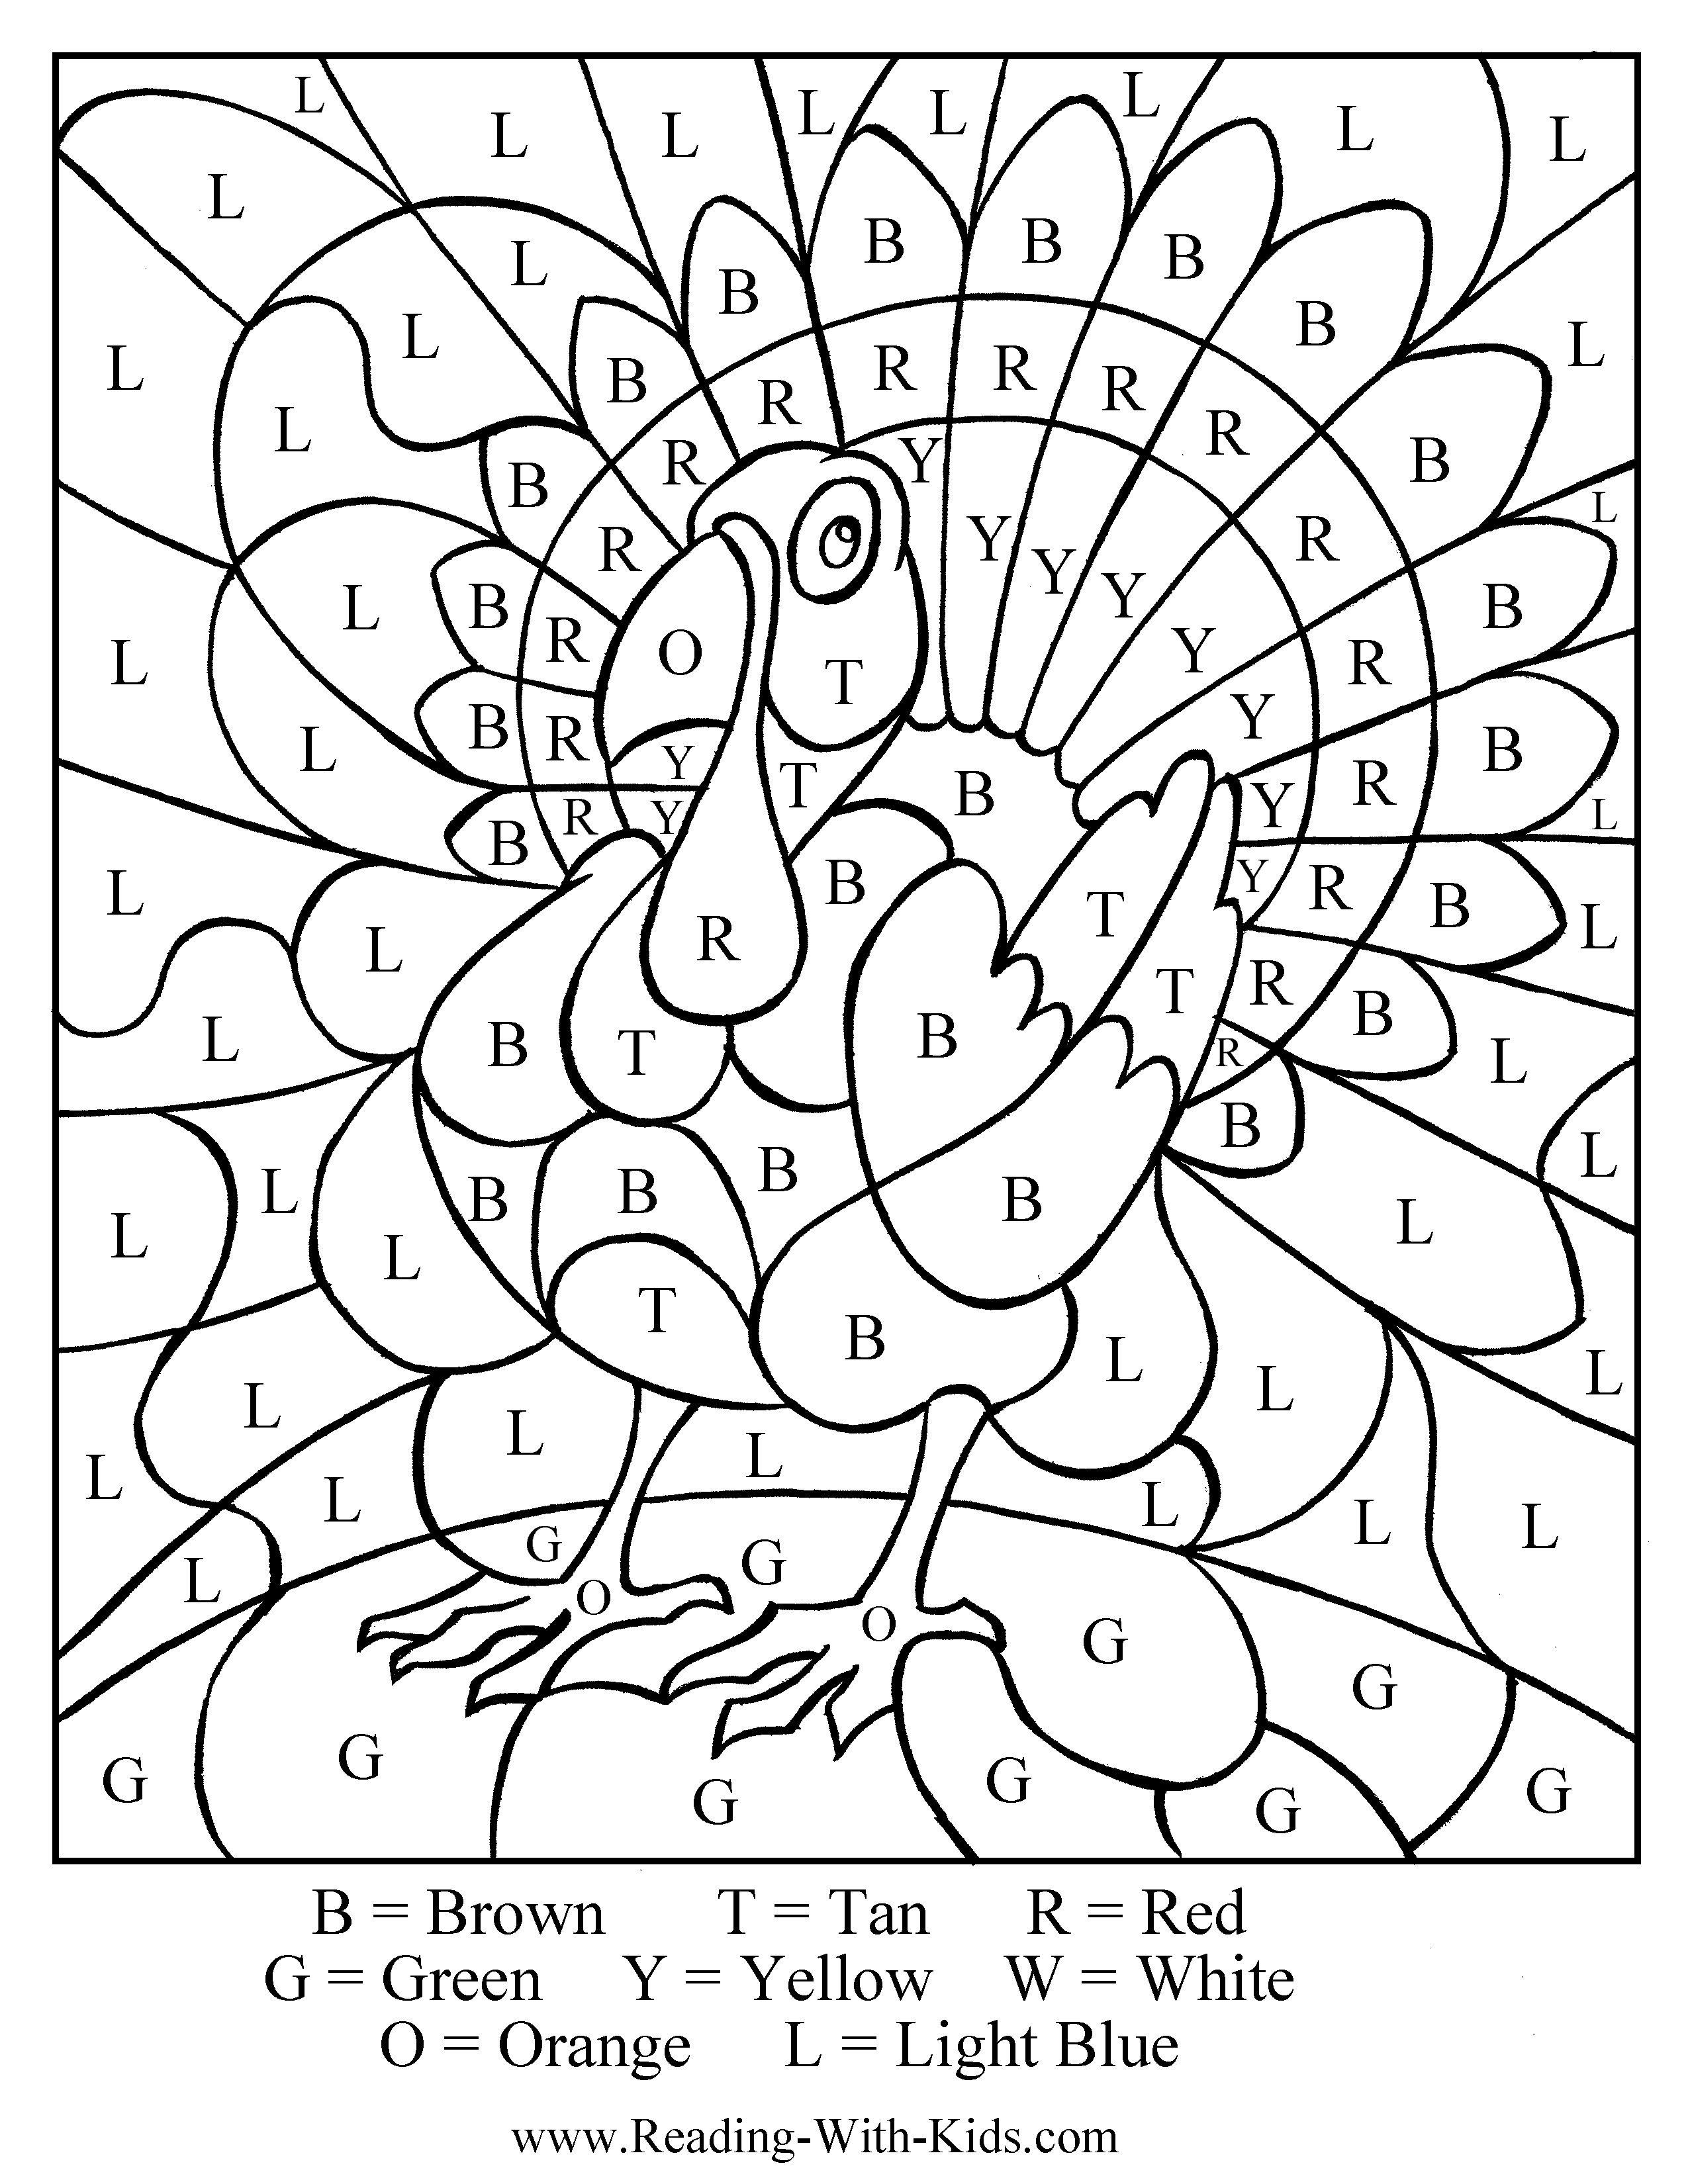 Colorletter Turkey - Several Great Thanksgiving Coloring Sheets - Free Printable Thanksgiving Crafts For Kids